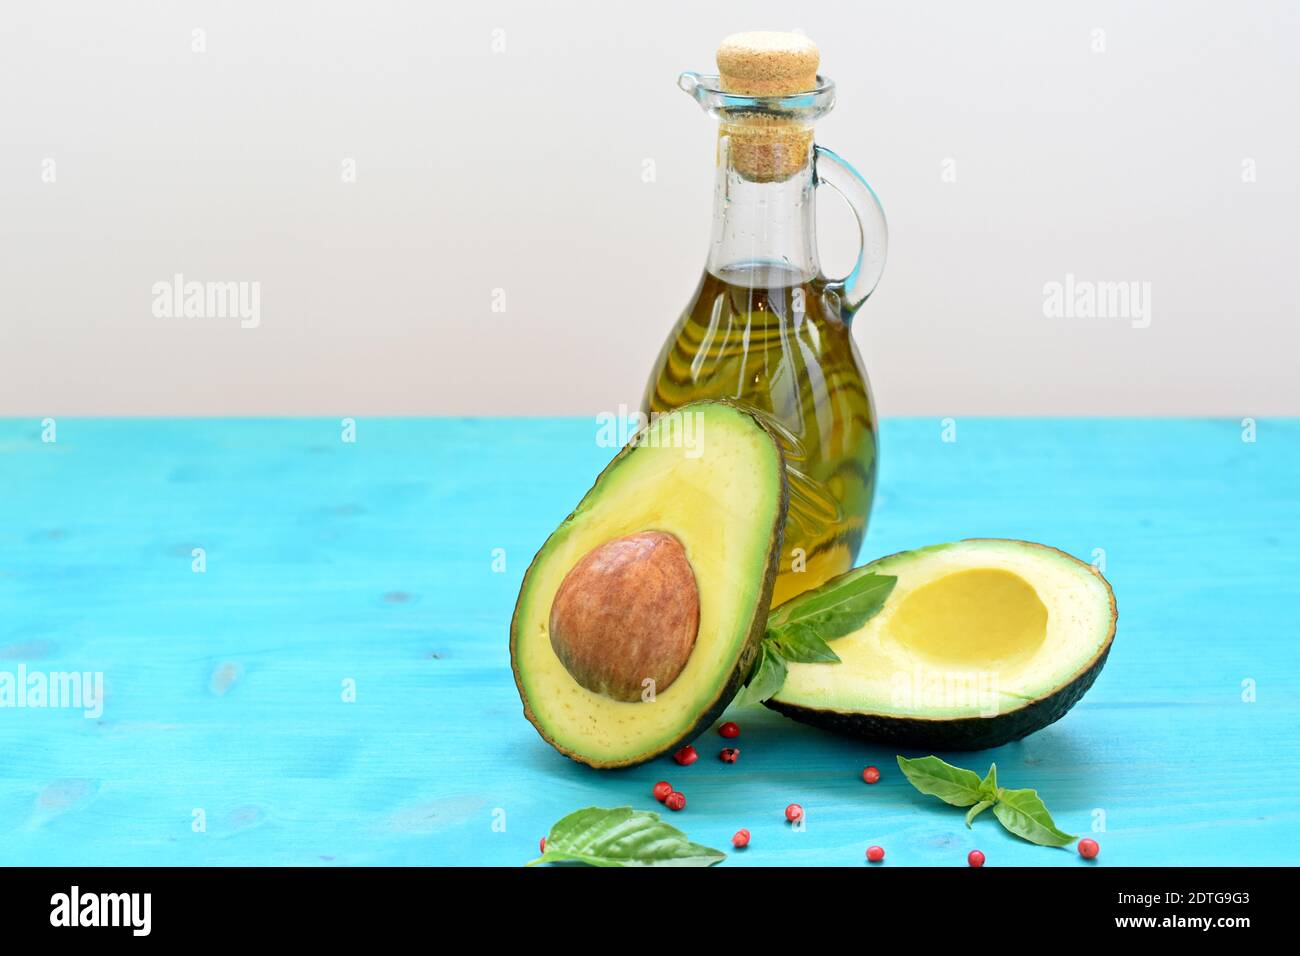 Concept of healthy food with cut avocado and a bottle of olive oil on blue and white background. Stock Photo